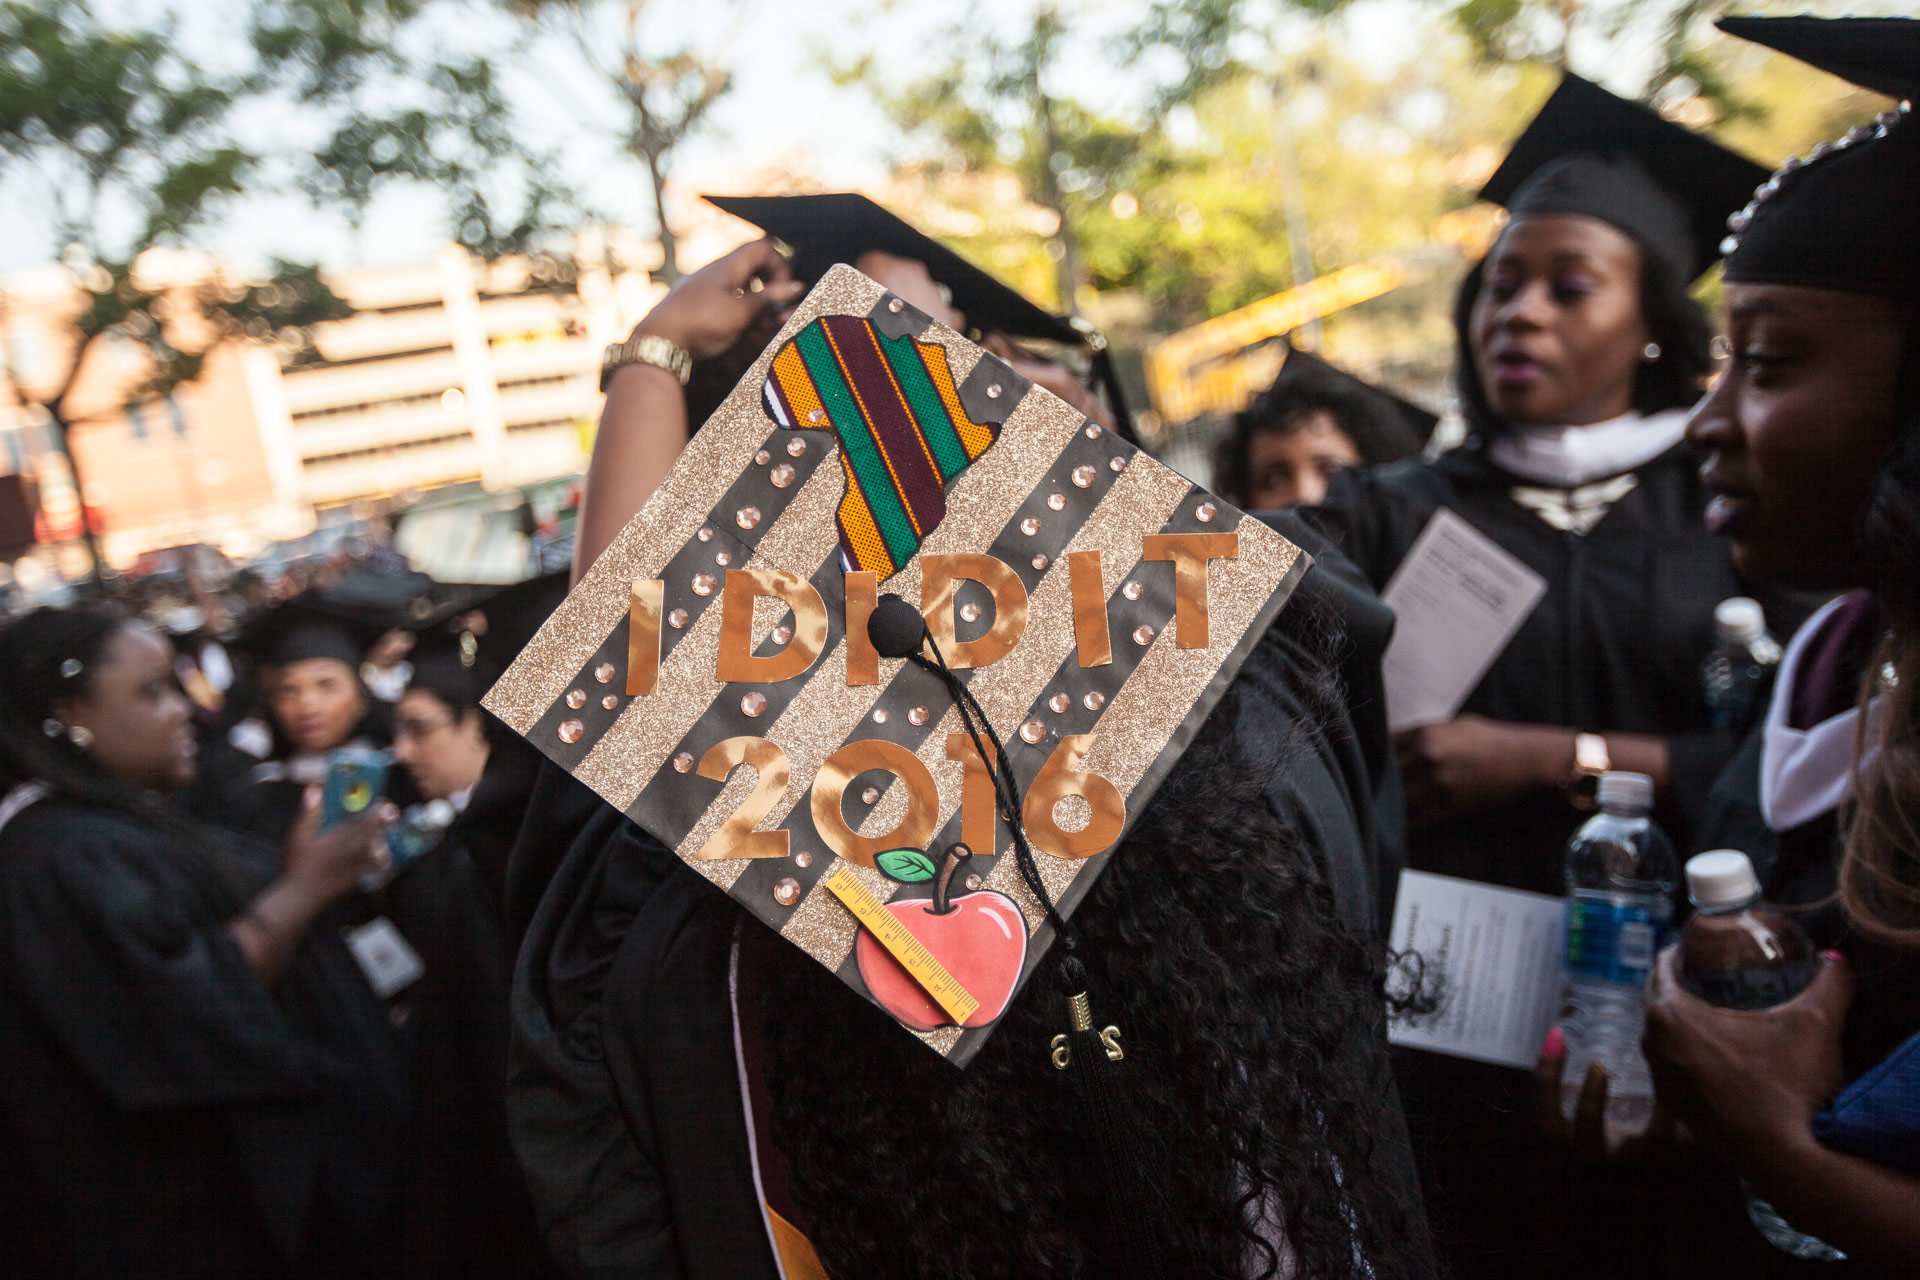 Brooklyn College Brooklyn College Graduates Over 4,000 Students at